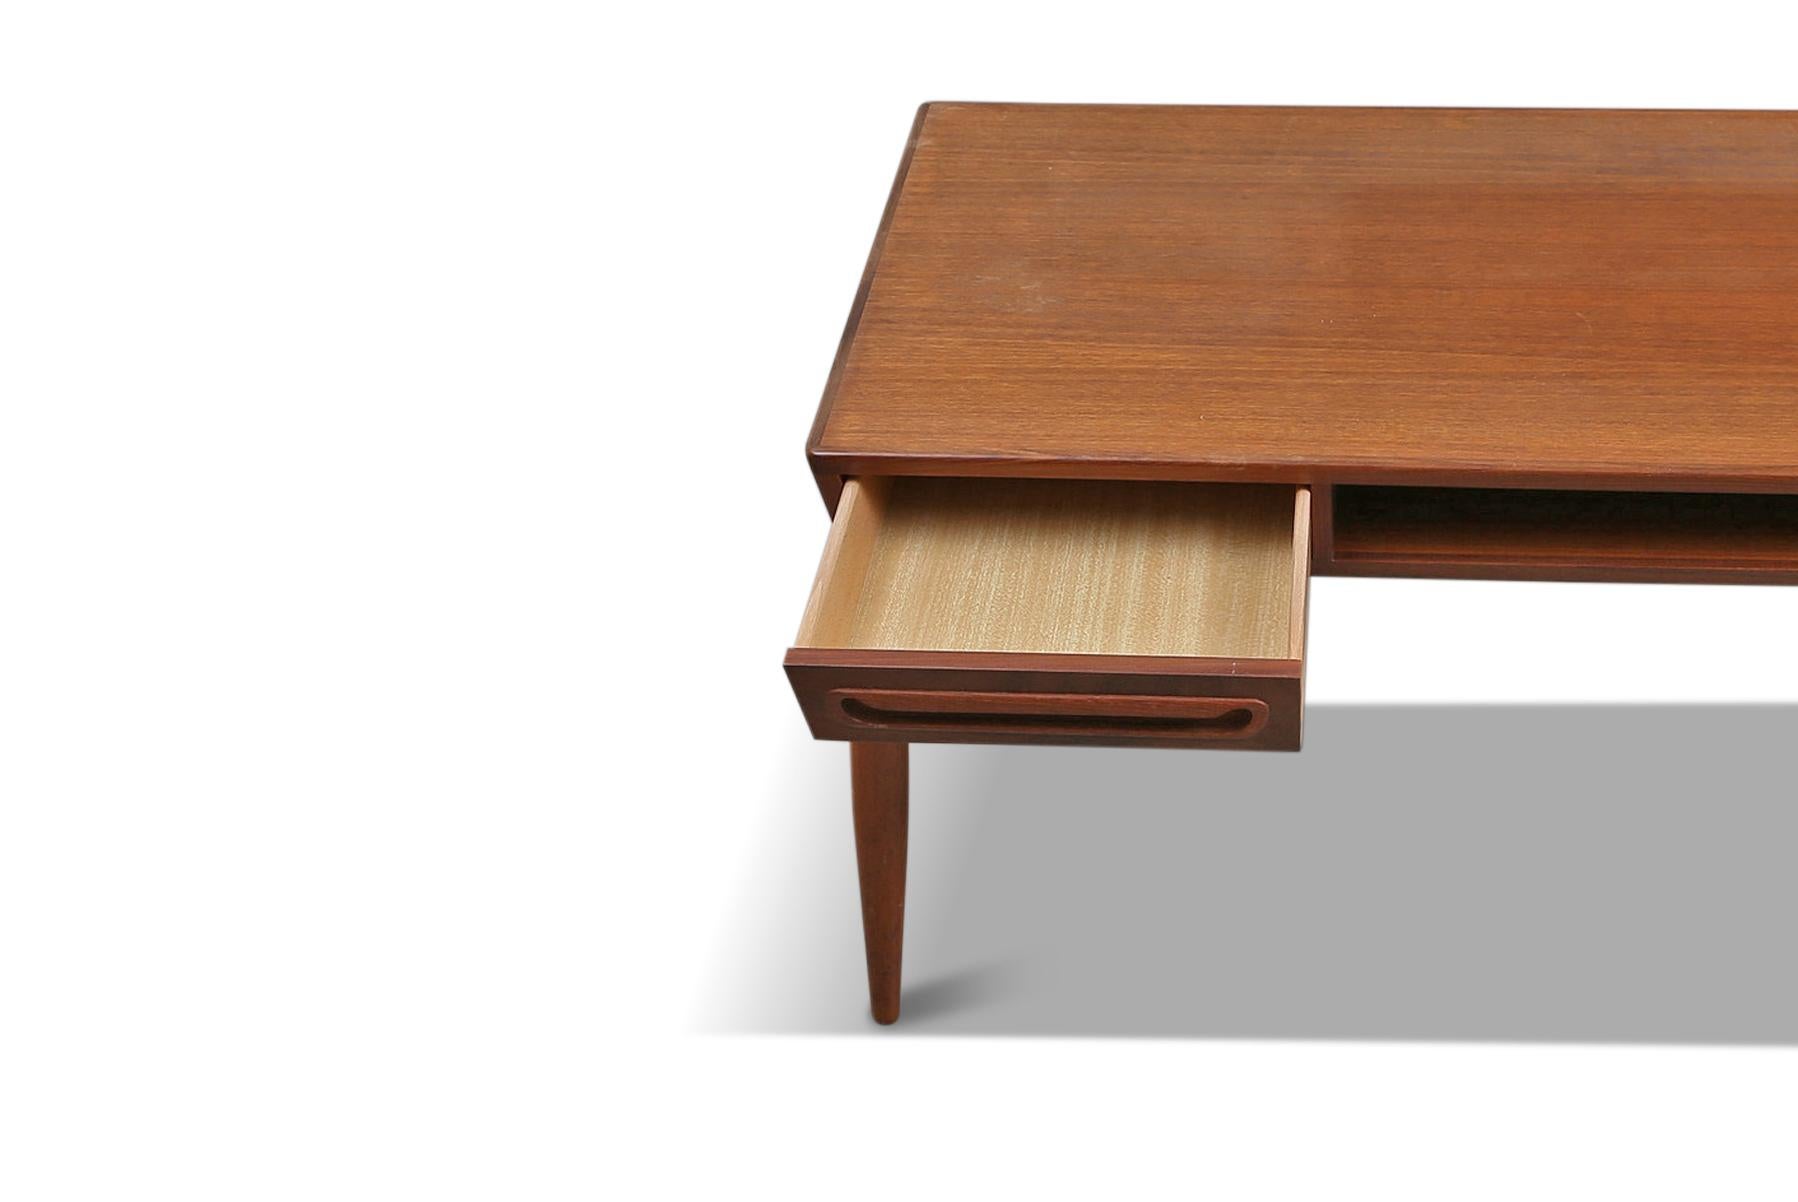 Johannes Andersen Atomic Teak Coffee Table with Drawers In Excellent Condition For Sale In Berkeley, CA